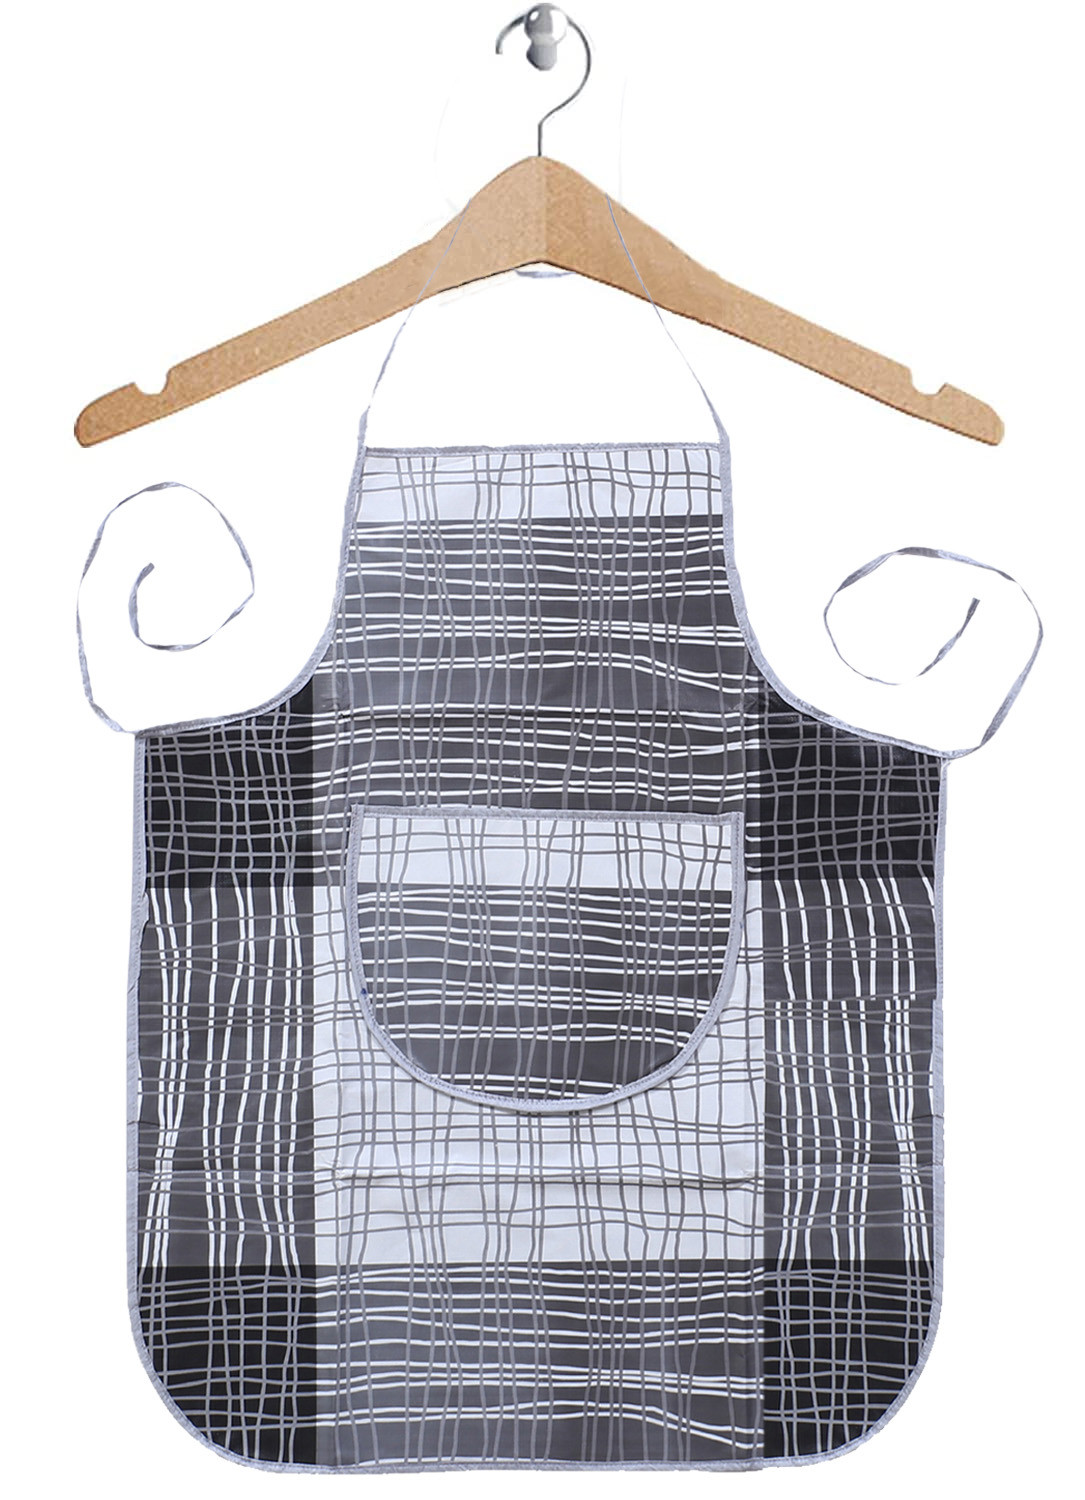 Kuber Industries Apron|PVC Unique Check Printed Kitchen Chef Cloth|Waterproof Centre Pocket Apron With Tying Cord for Men & Women (Gray)